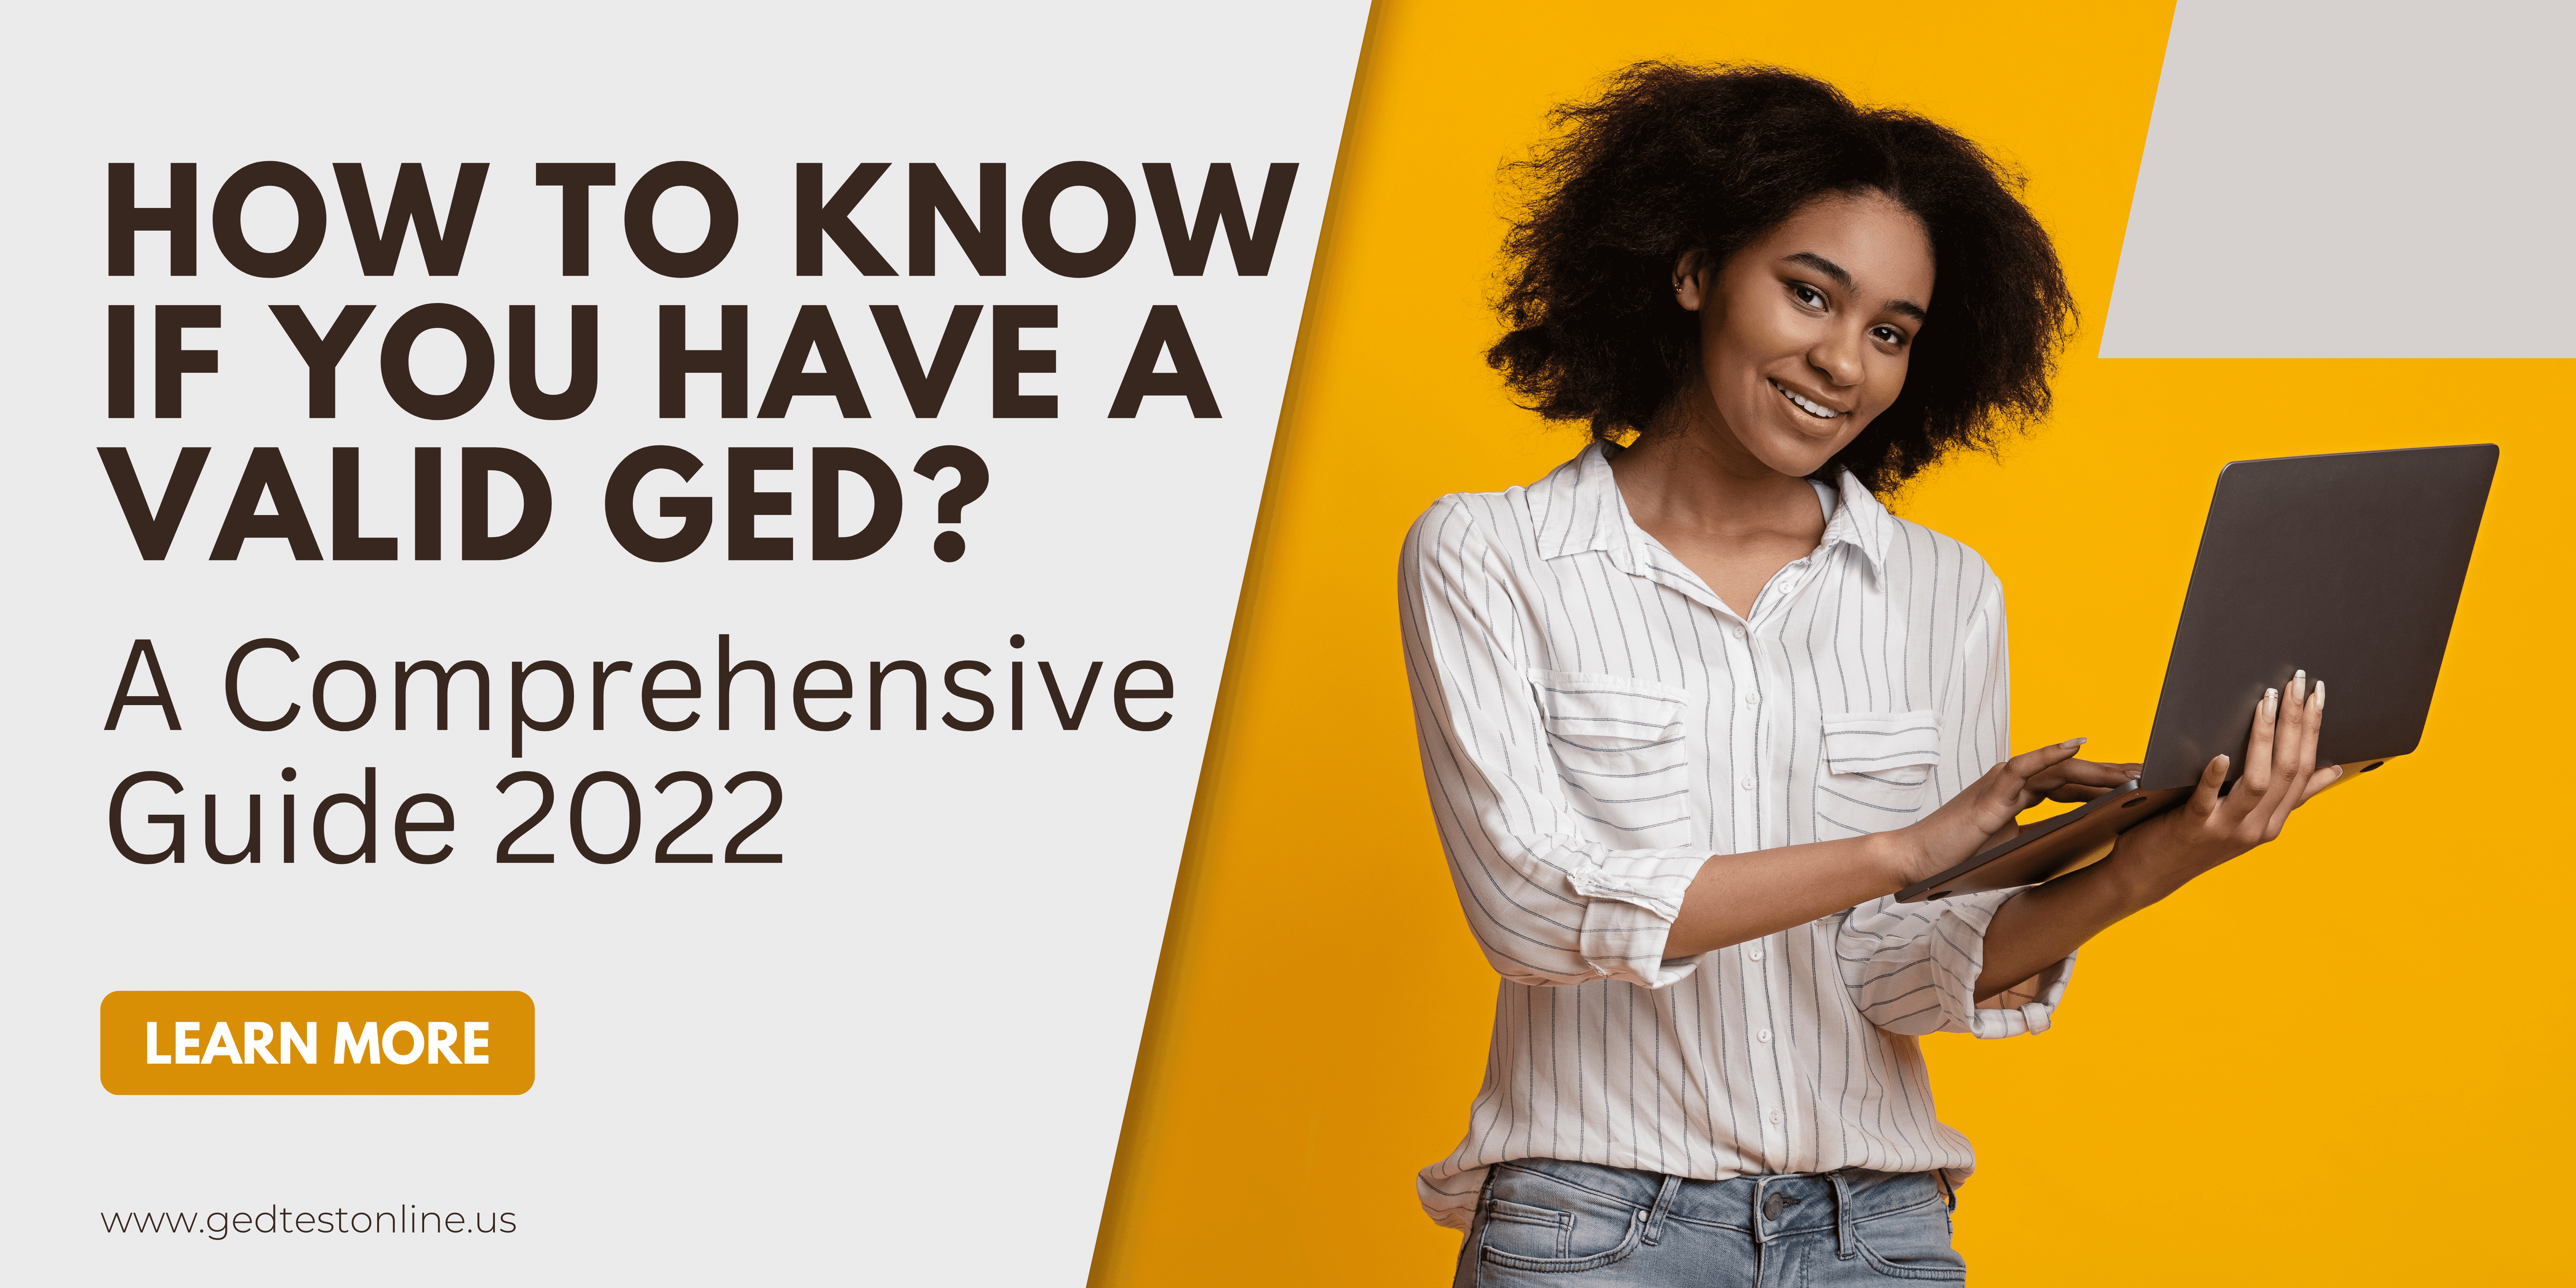 How to Know If You Have a Valid GED? A Comprehensive Guide 2022